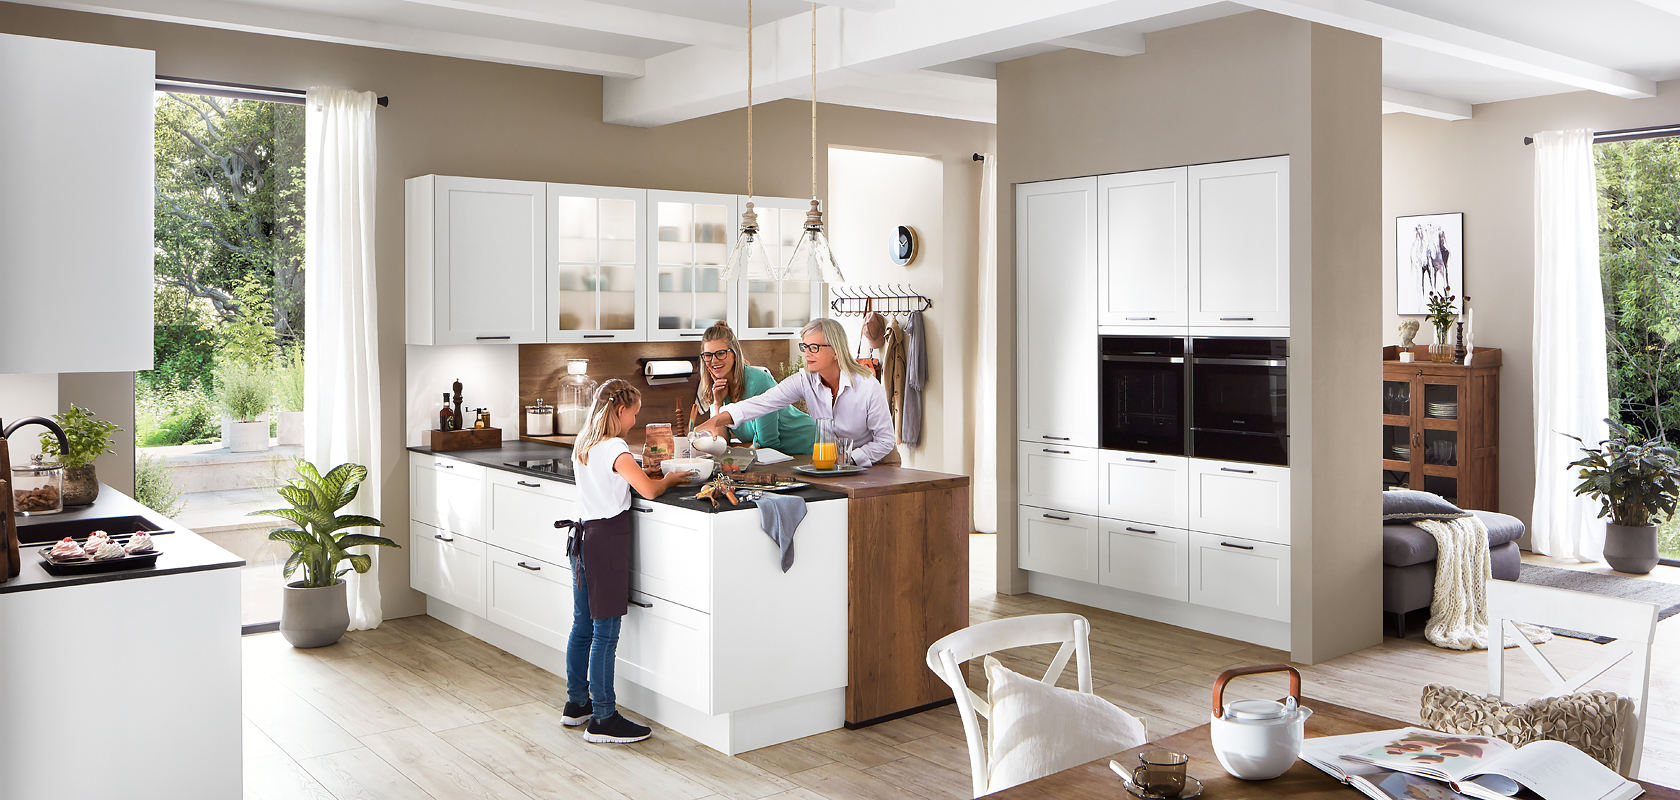 A modern kitchen filled with natural light where a family enjoys time together, showcasing sleek white cabinetry and stainless steel appliances.